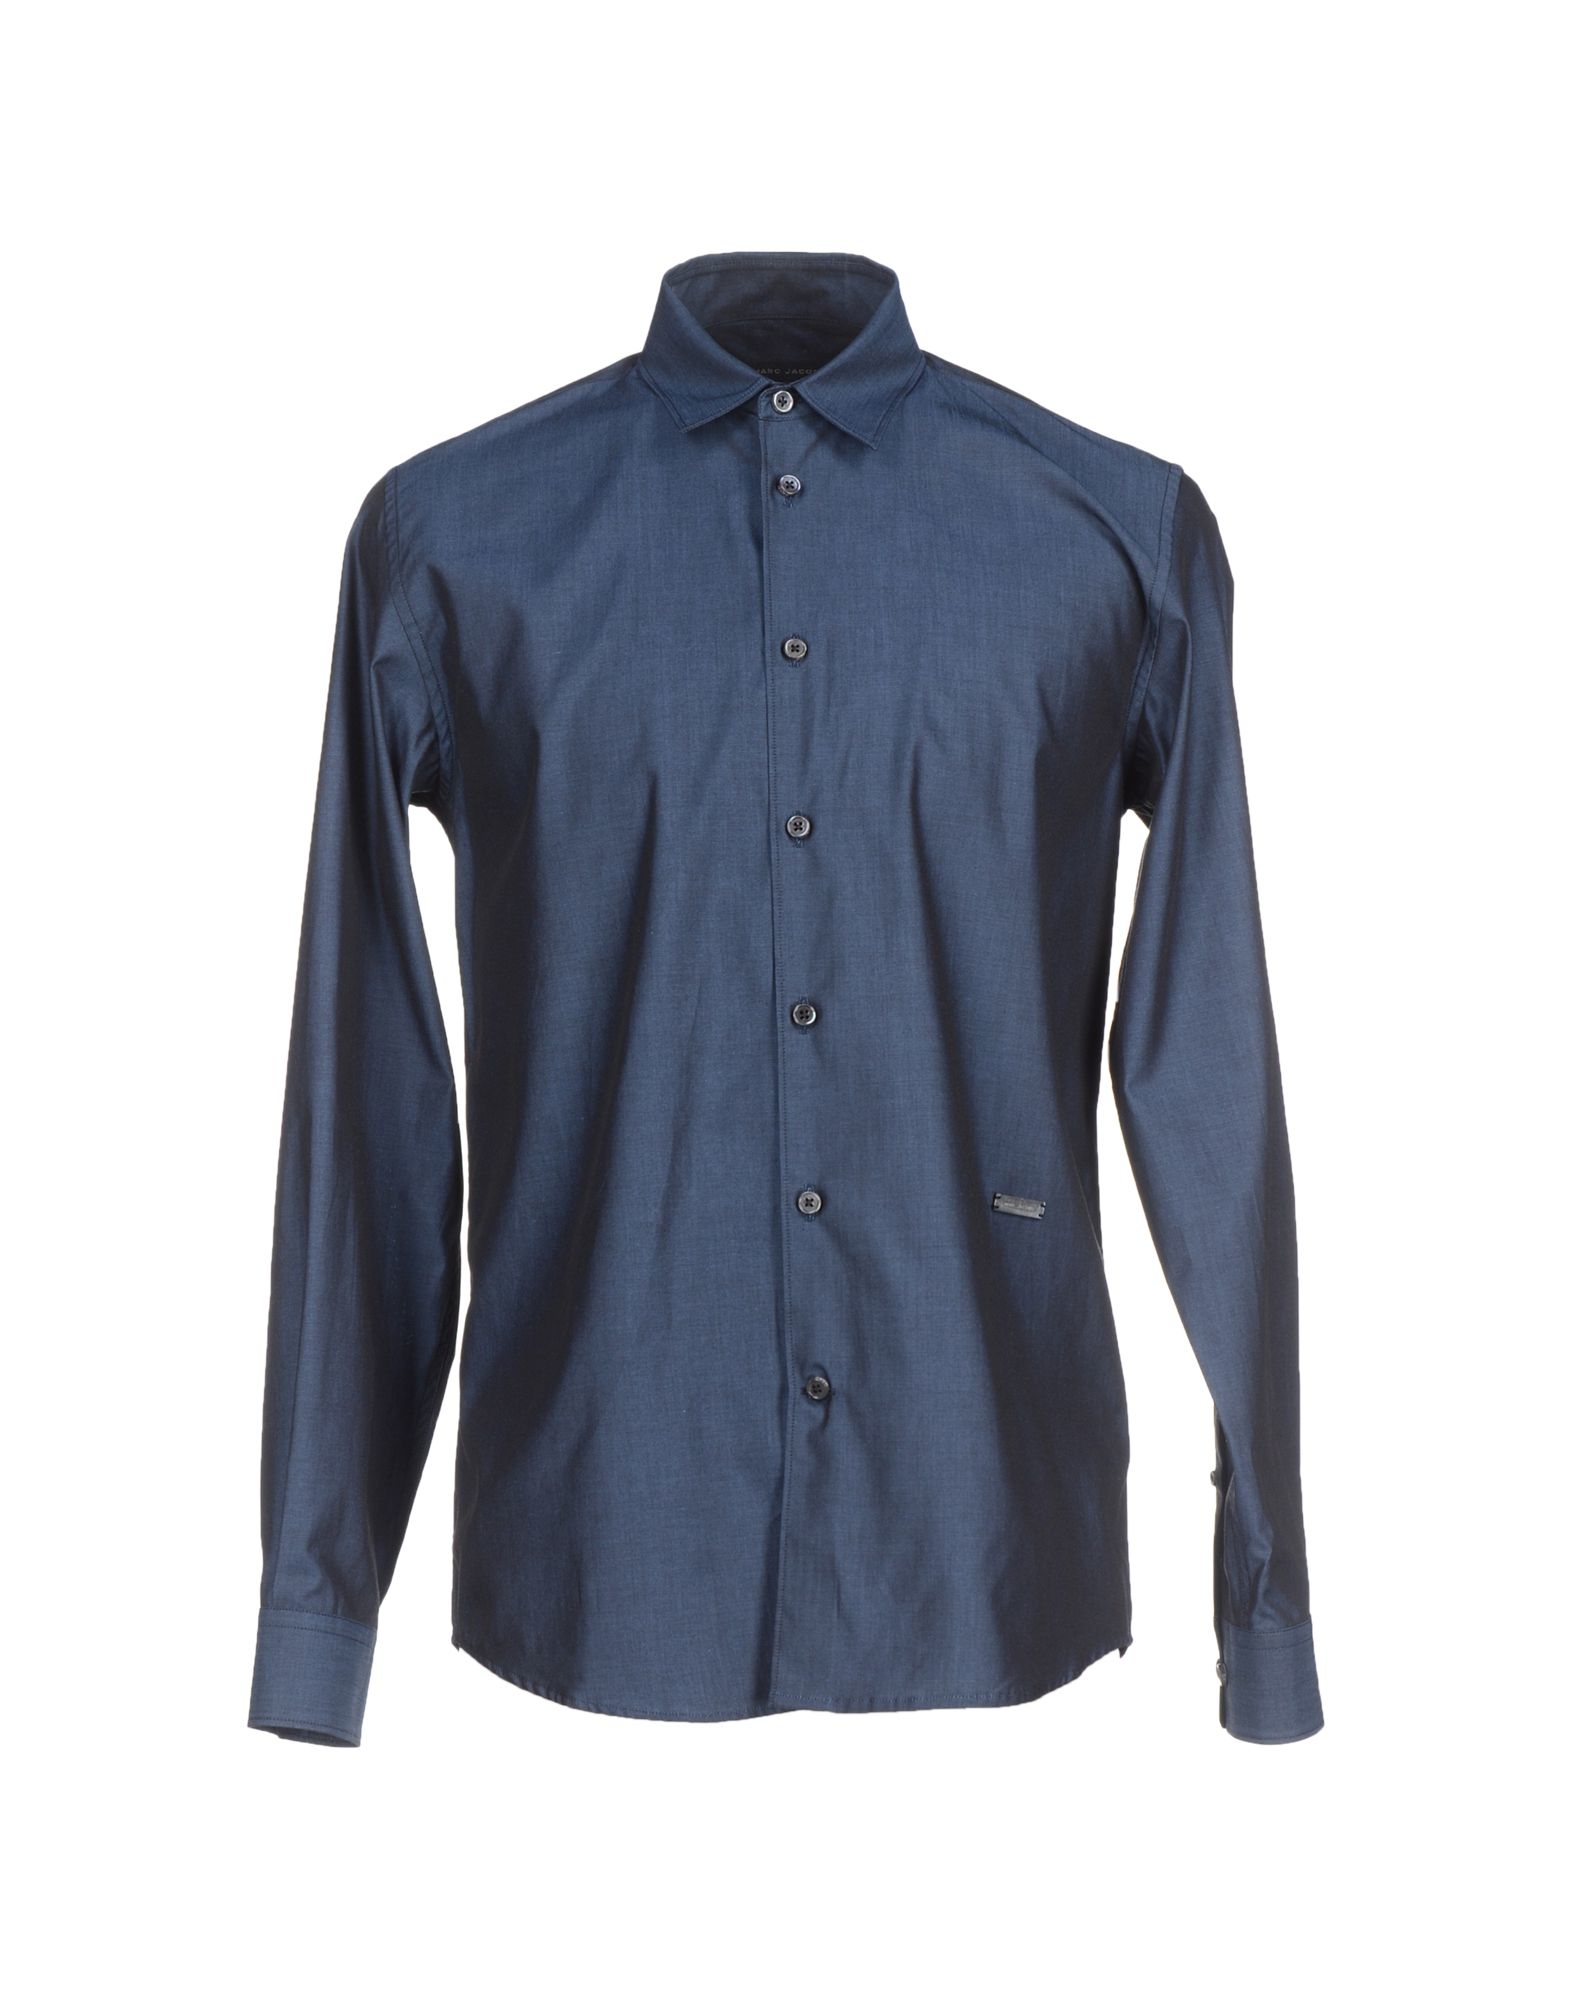 Lyst - Marc Jacobs Shirt in Blue for Men